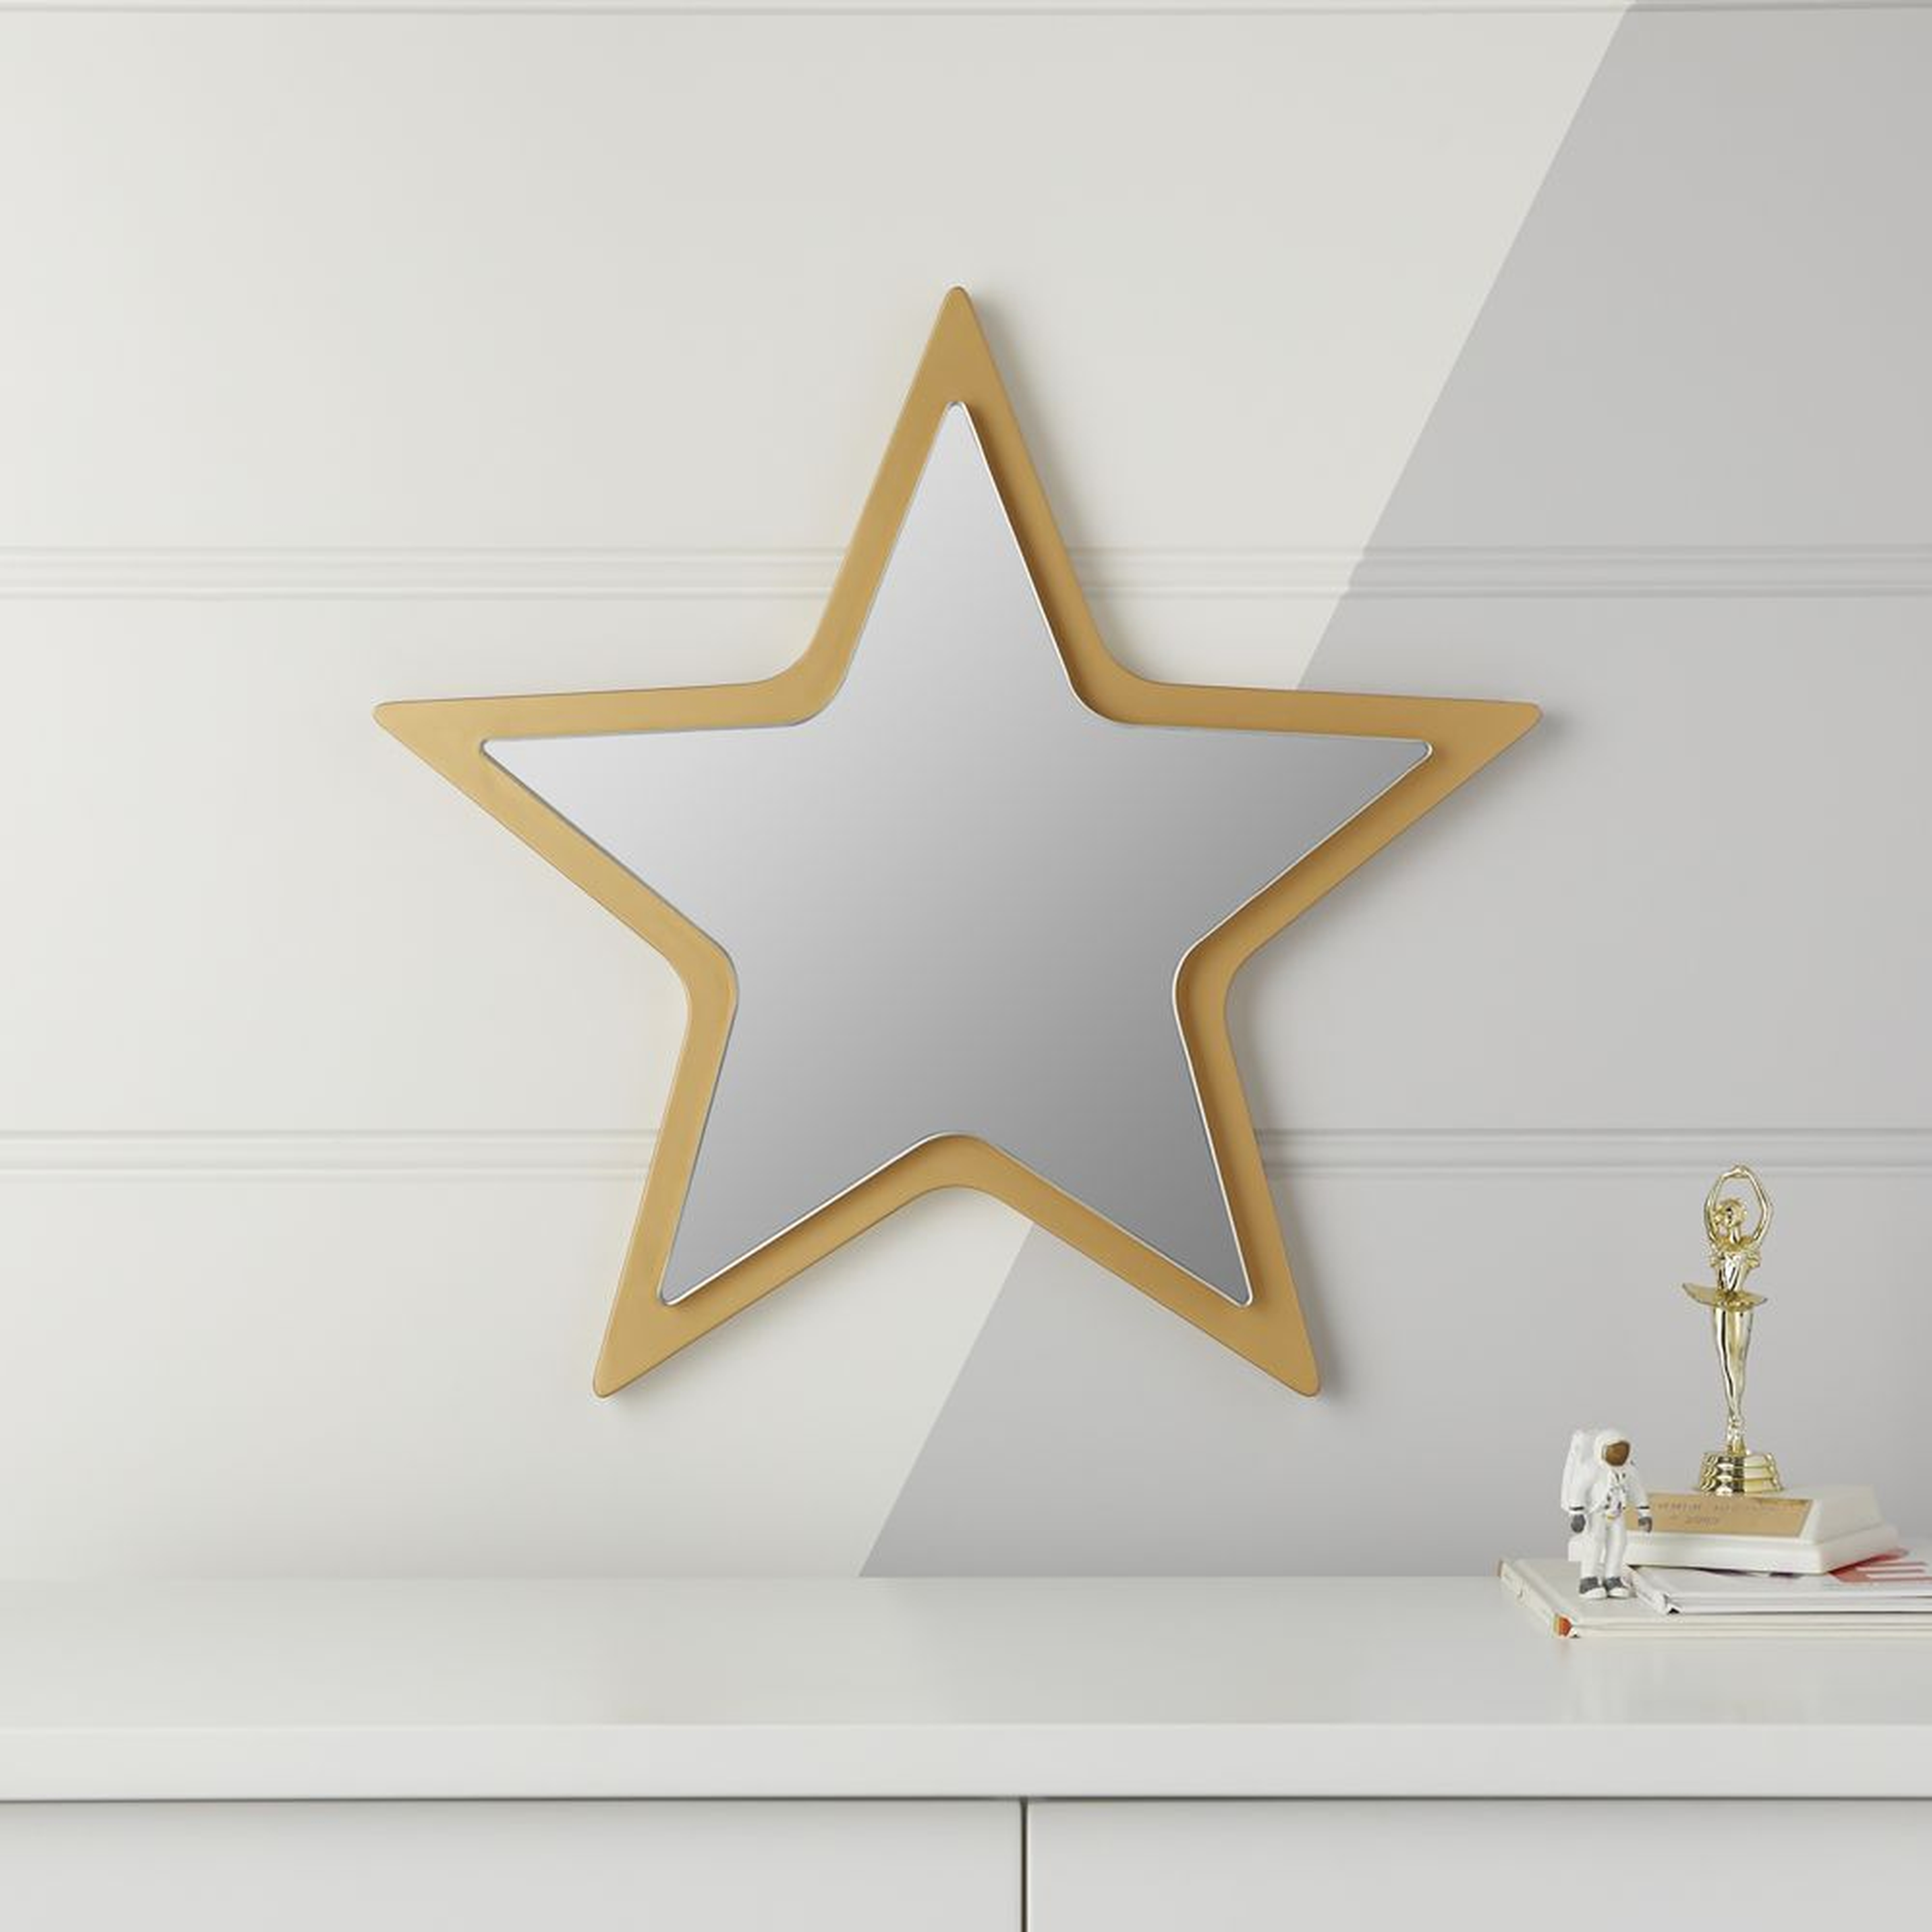 Star Mirror - Crate and Barrel